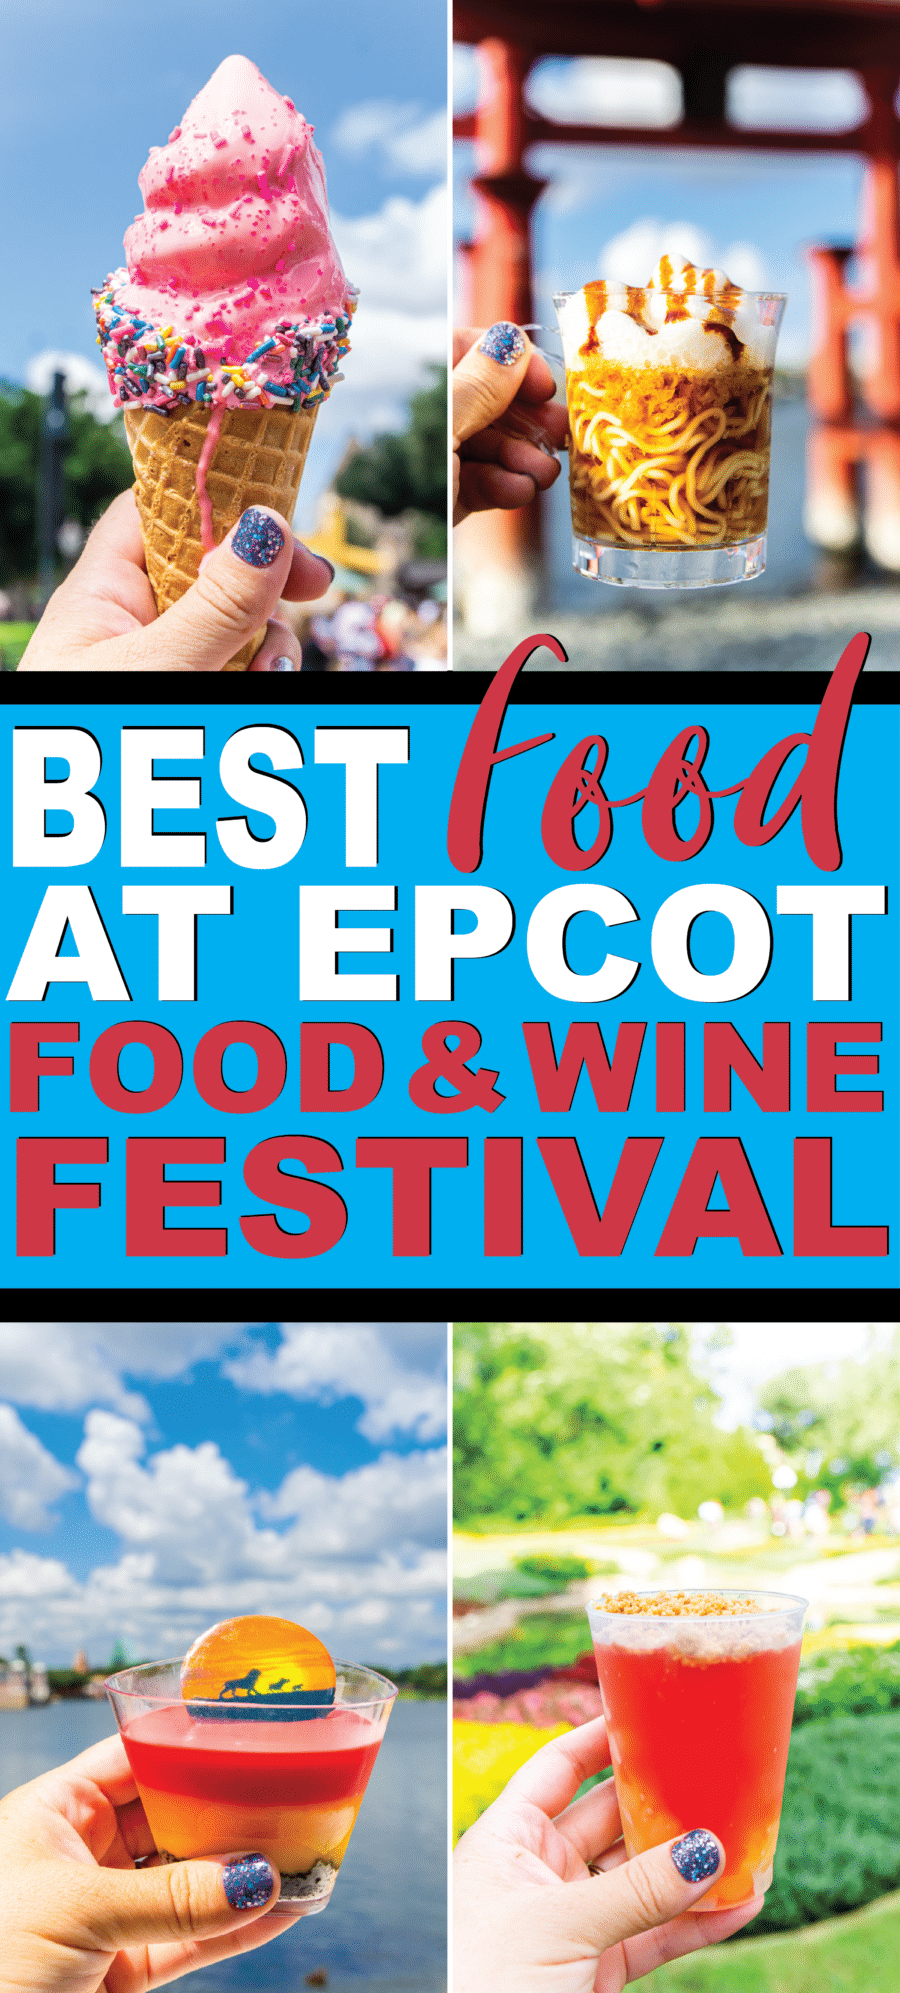 Best Food at the 2019 Epcot Food and Wine Festival | Pictures & Reviews